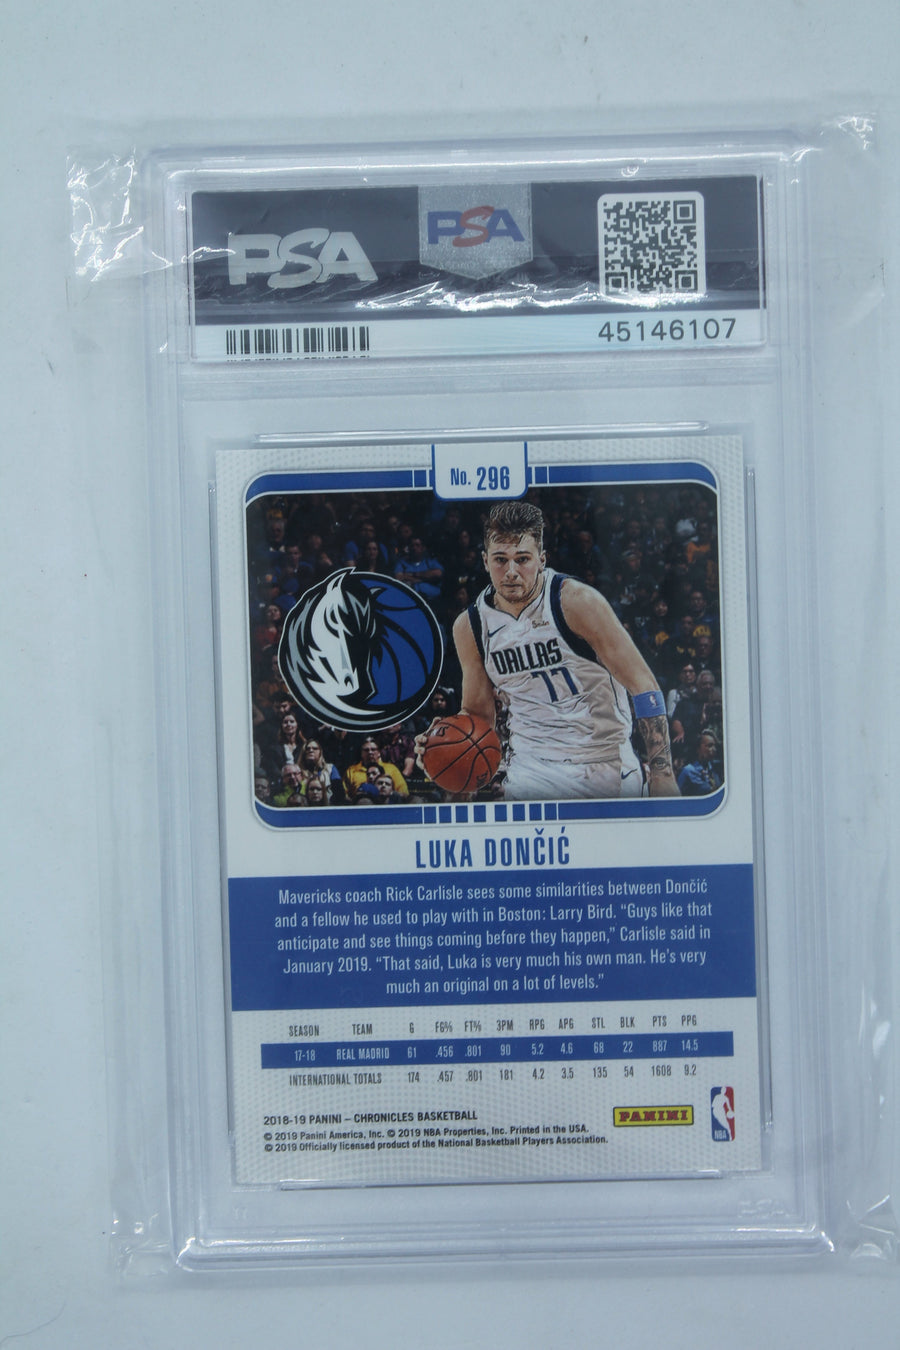 Luka Doncic 2018-19 Panini Chronicles Graded PSA 8 Rookie Card